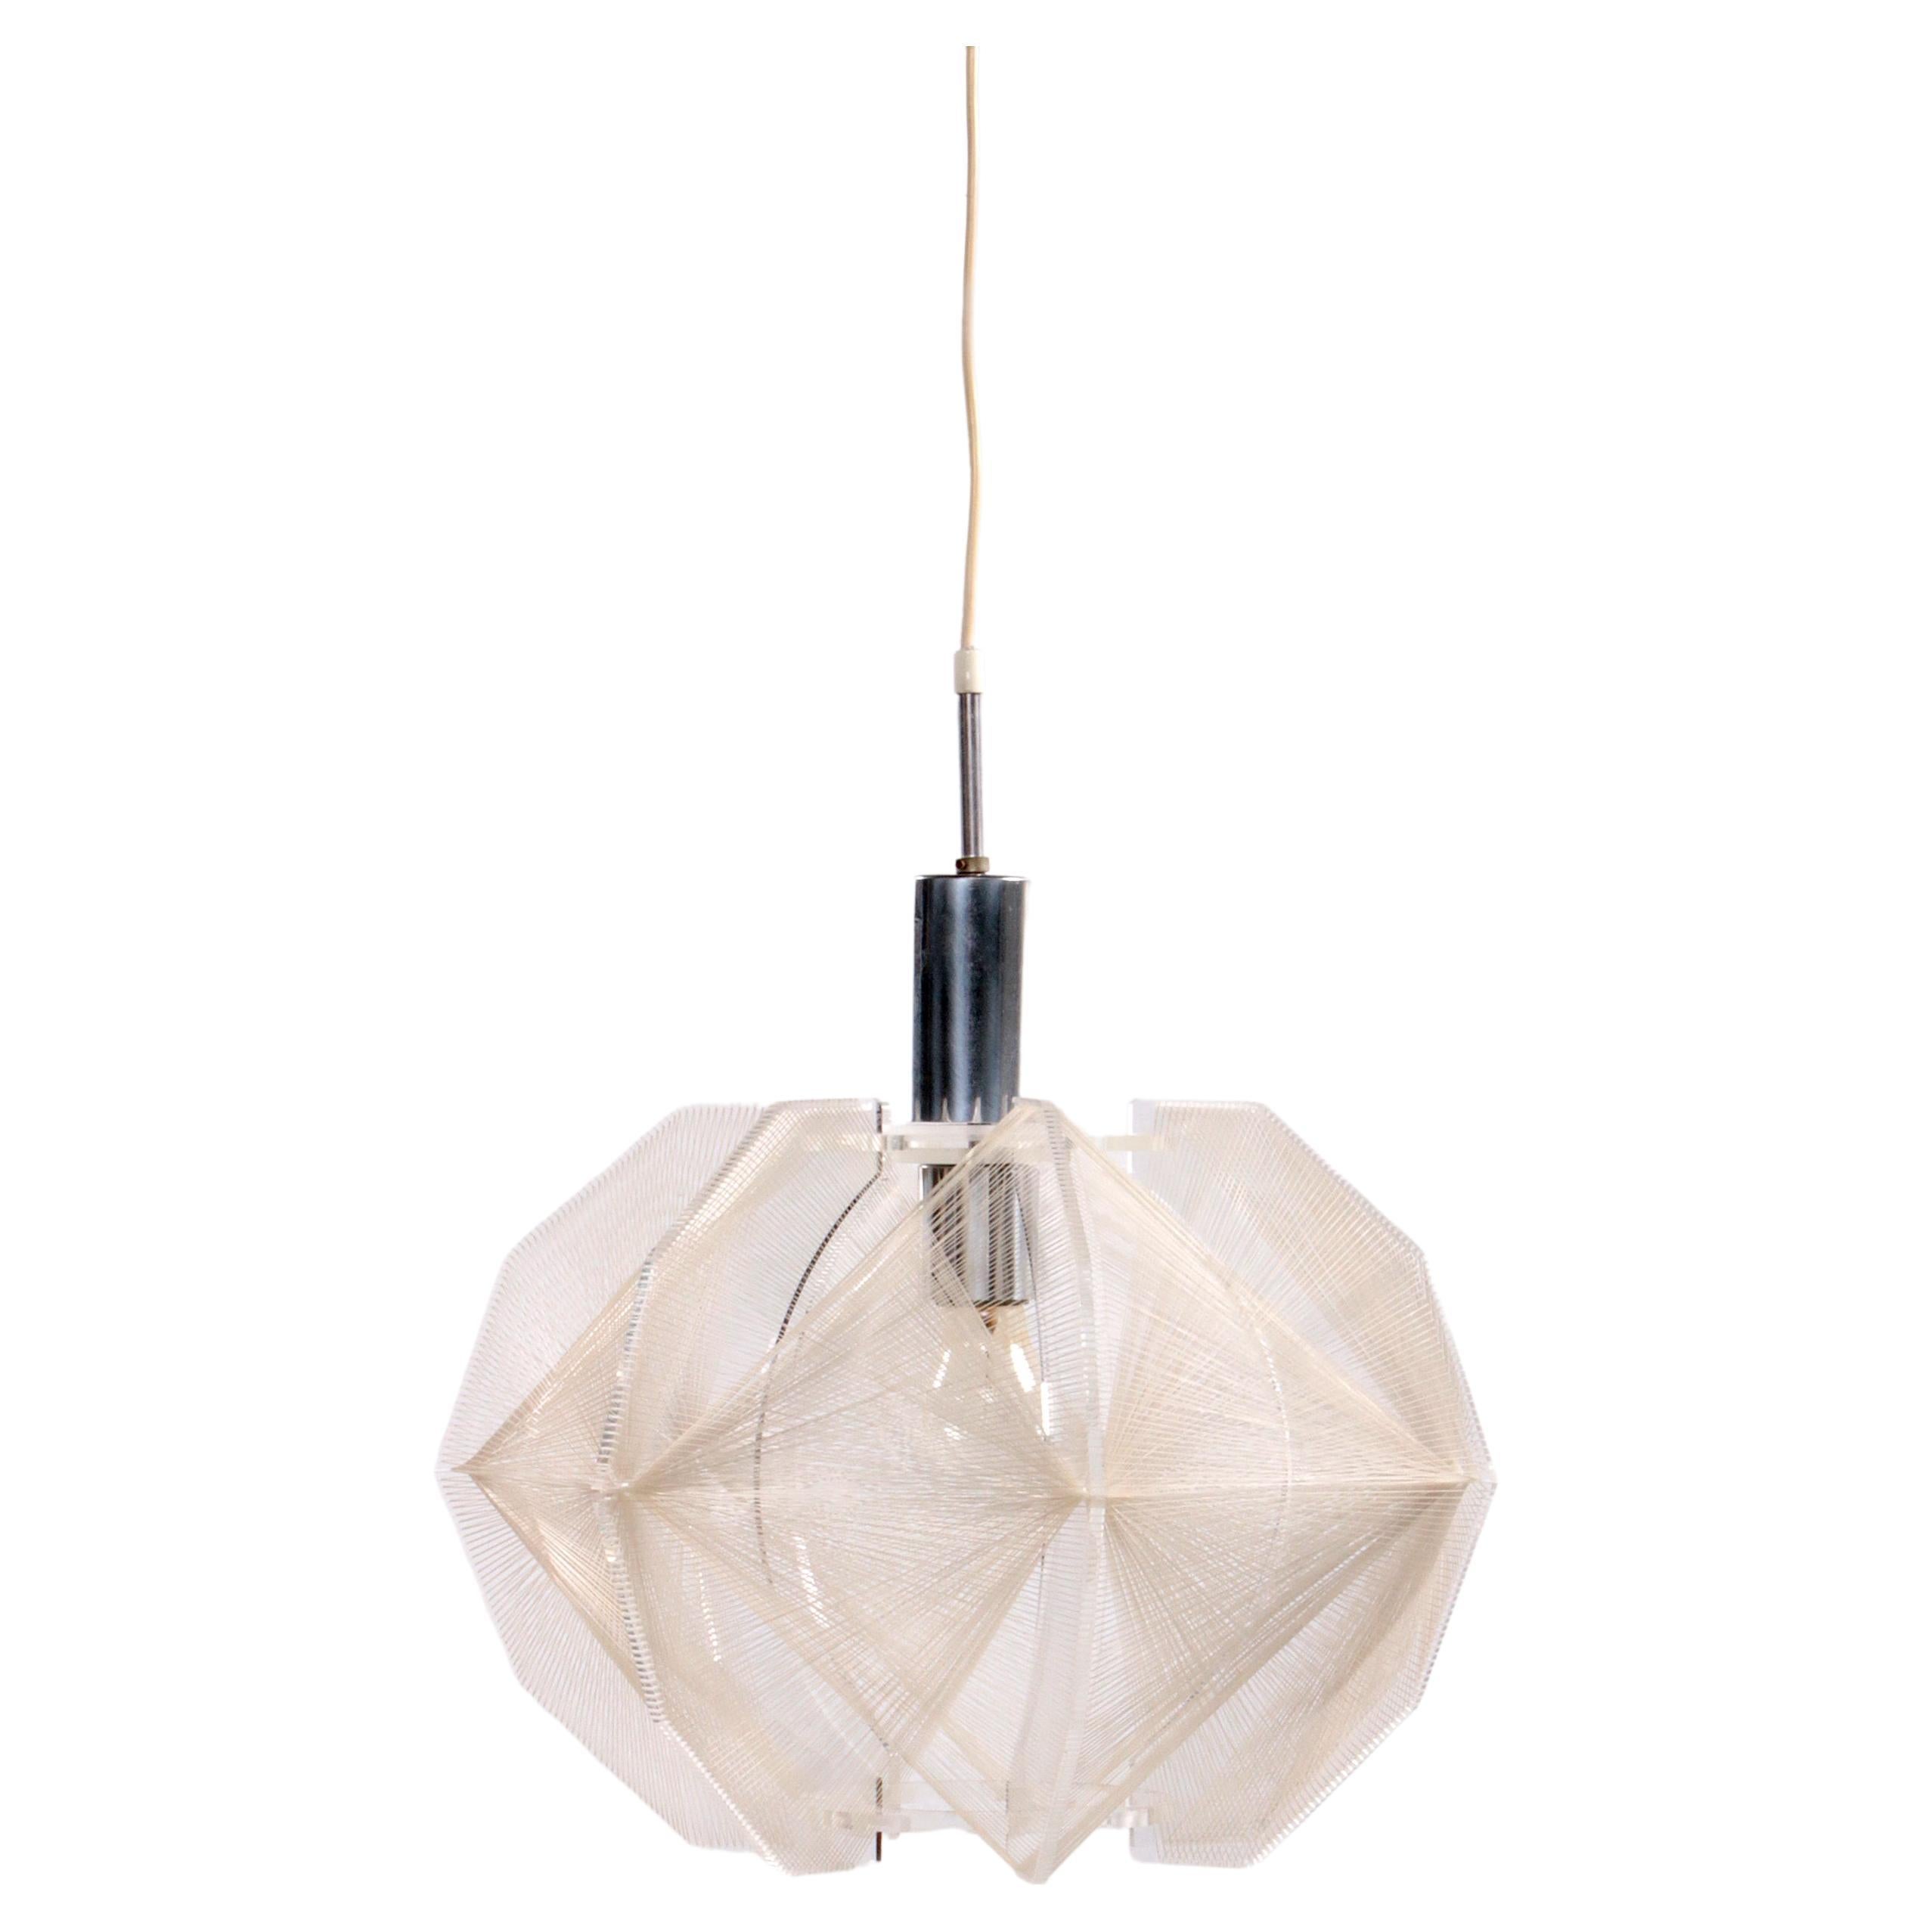 Vintage Paul Secon Spider Web Hanging Lamp, 1960 Germany